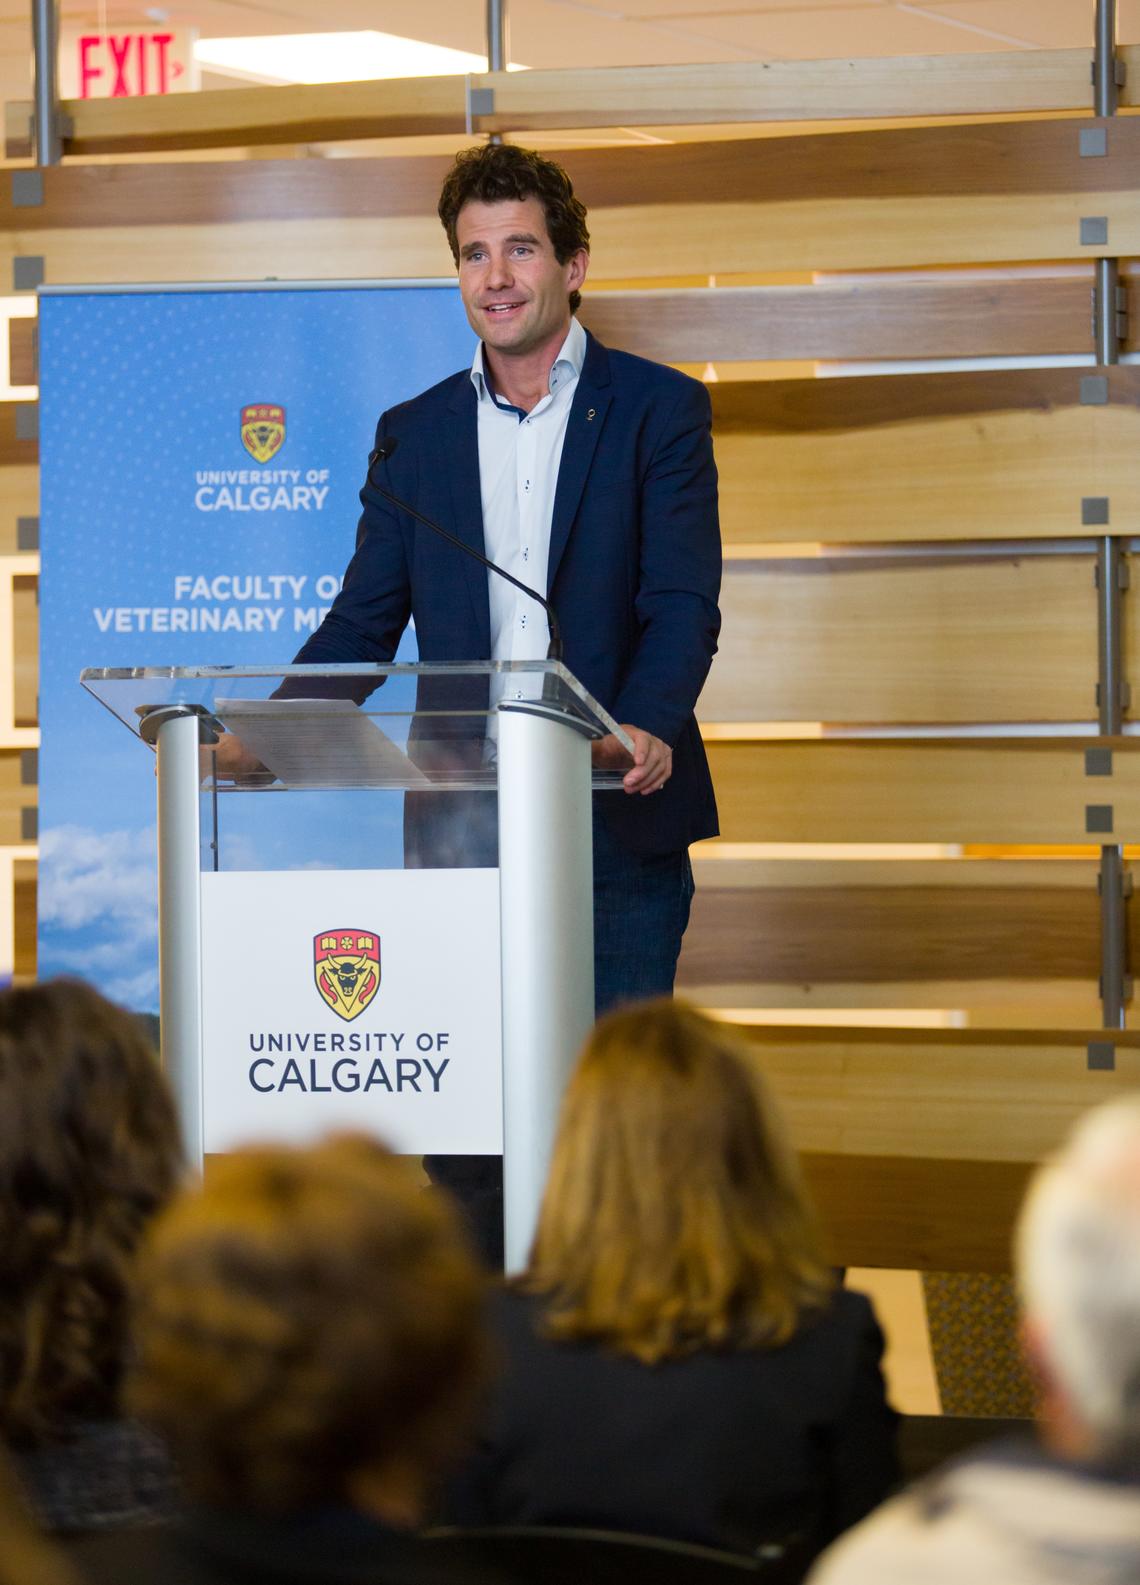 Dr. Edouard Timsit wants to tackle some of the issues facing Alberta's beef cattle industry, including antimicrobial resistance, zoonotic diseases and beef quality and safety.